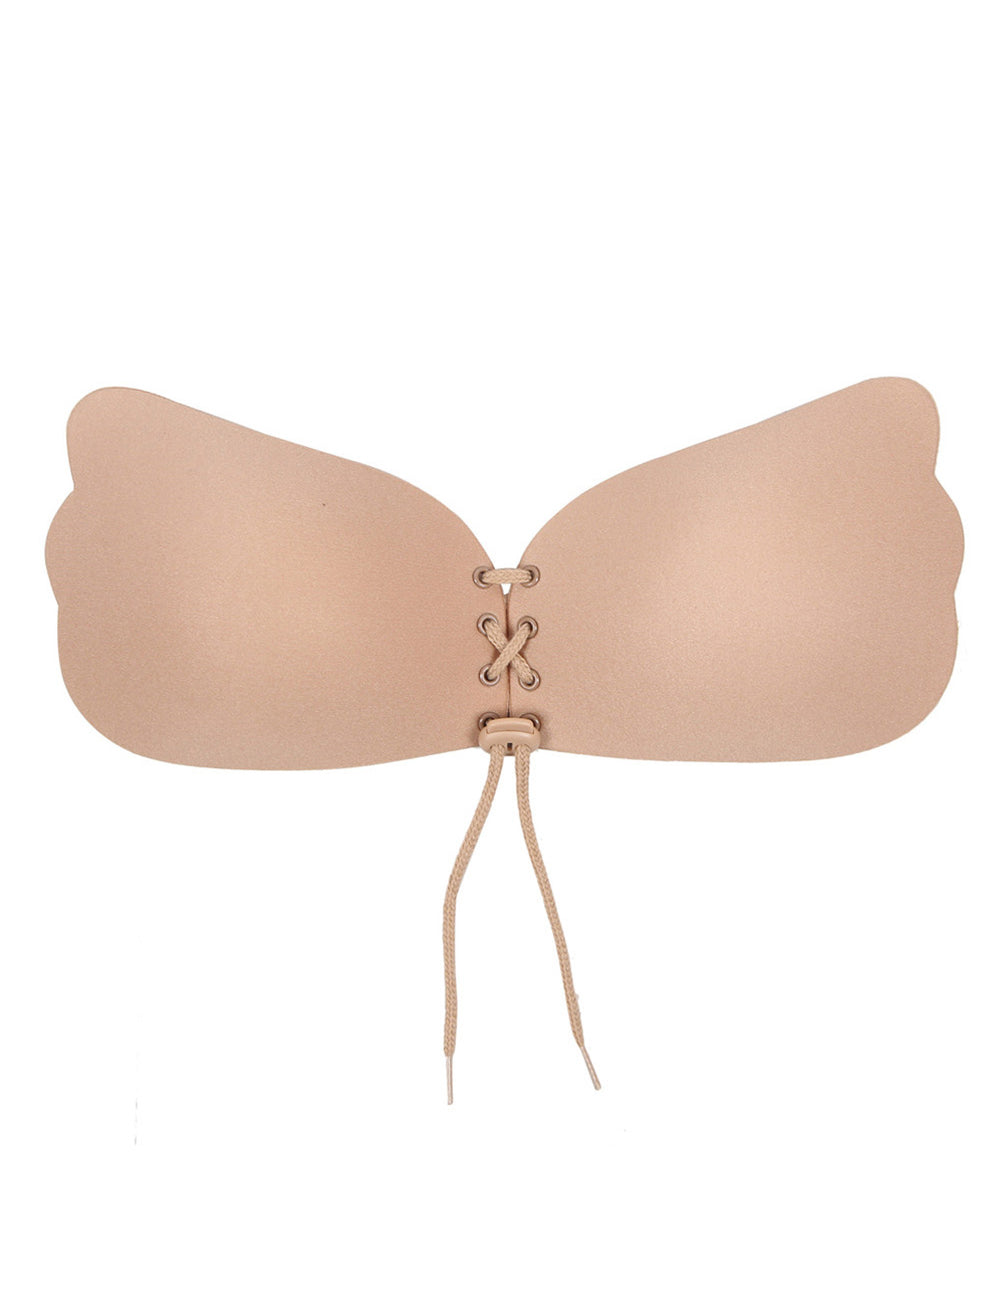 ohyeah Stick on Bra Cups Backless Adhesive Front Fasten Silicone Invisible Bra